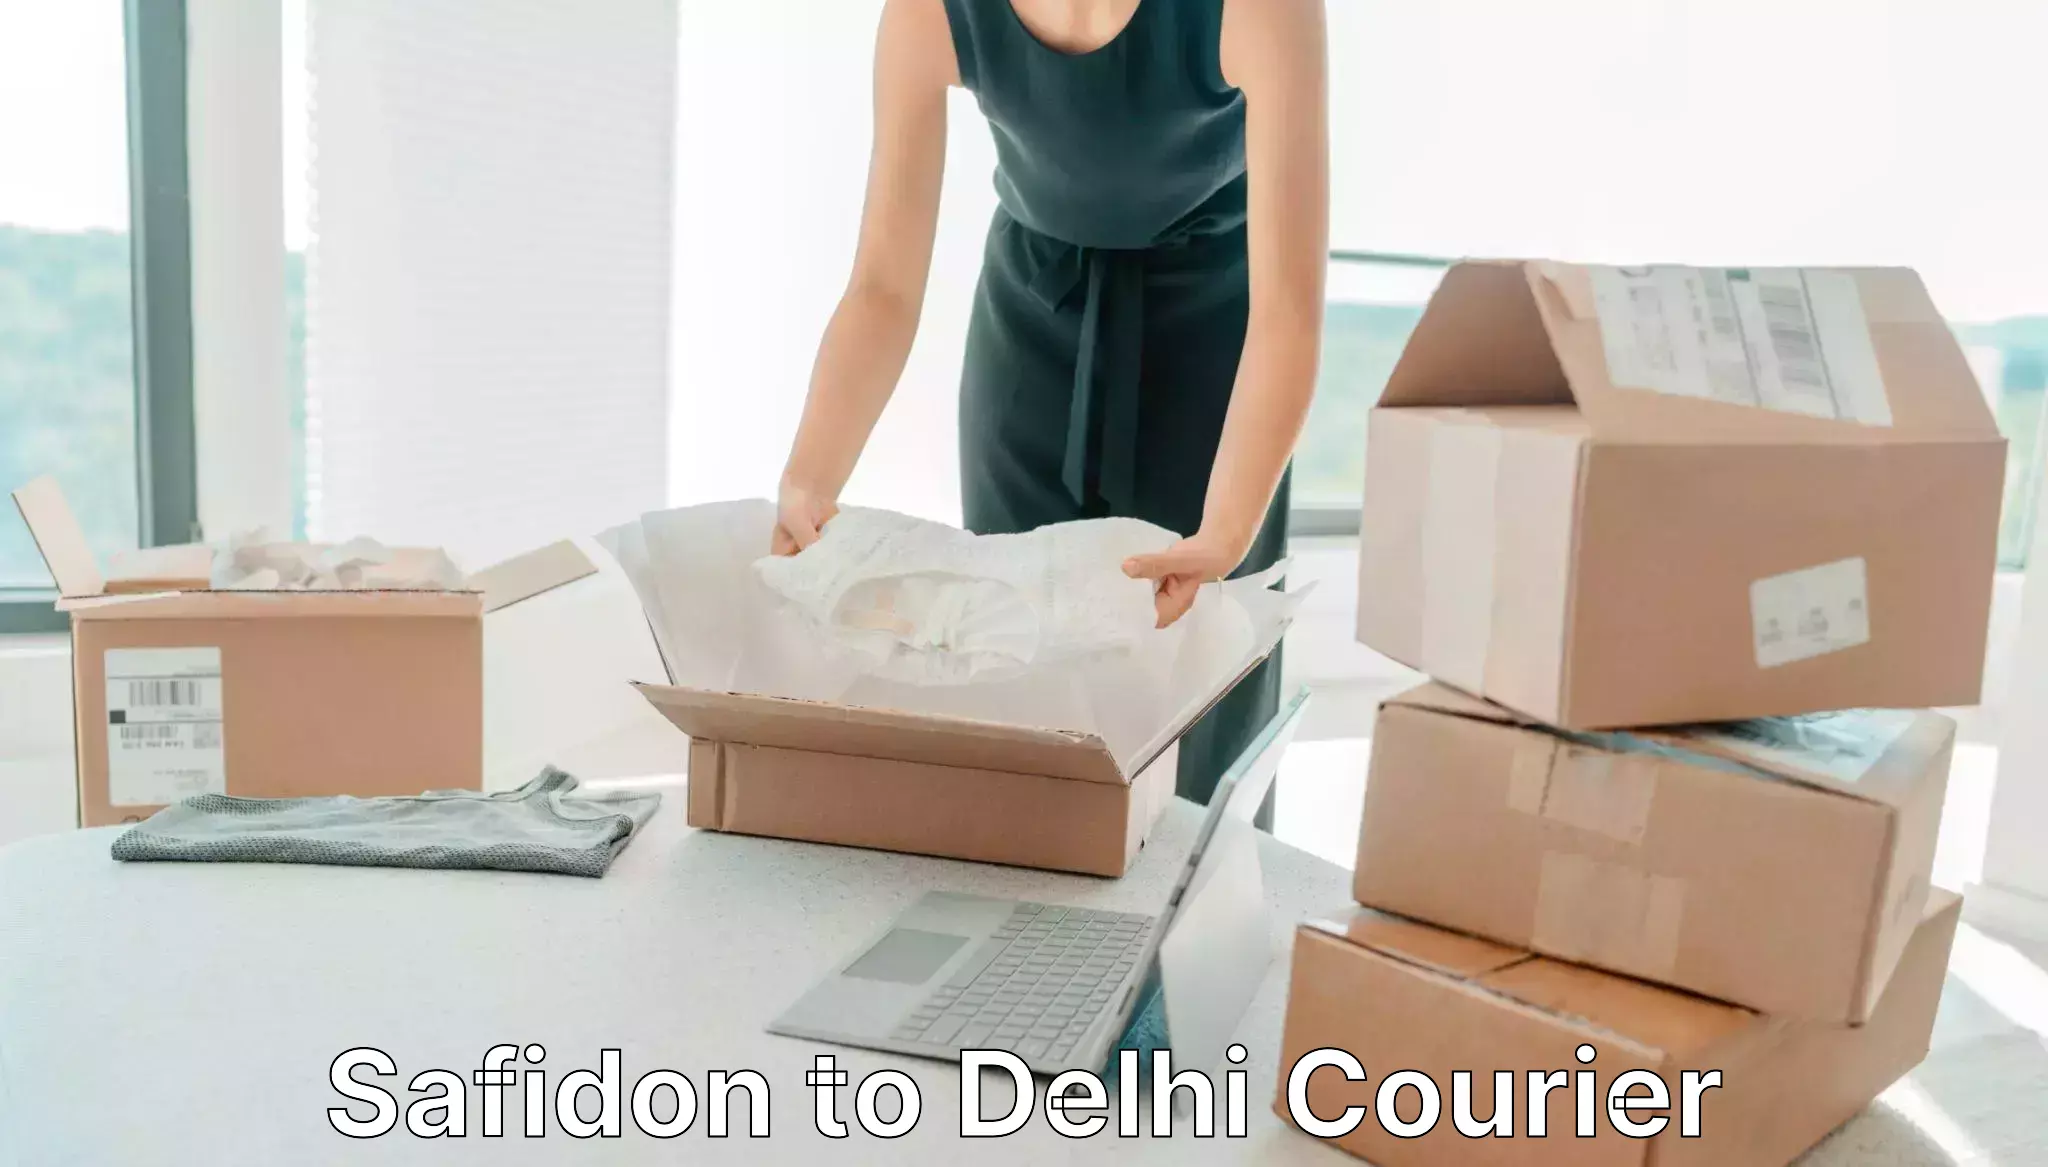 Courier service booking Safidon to NCR